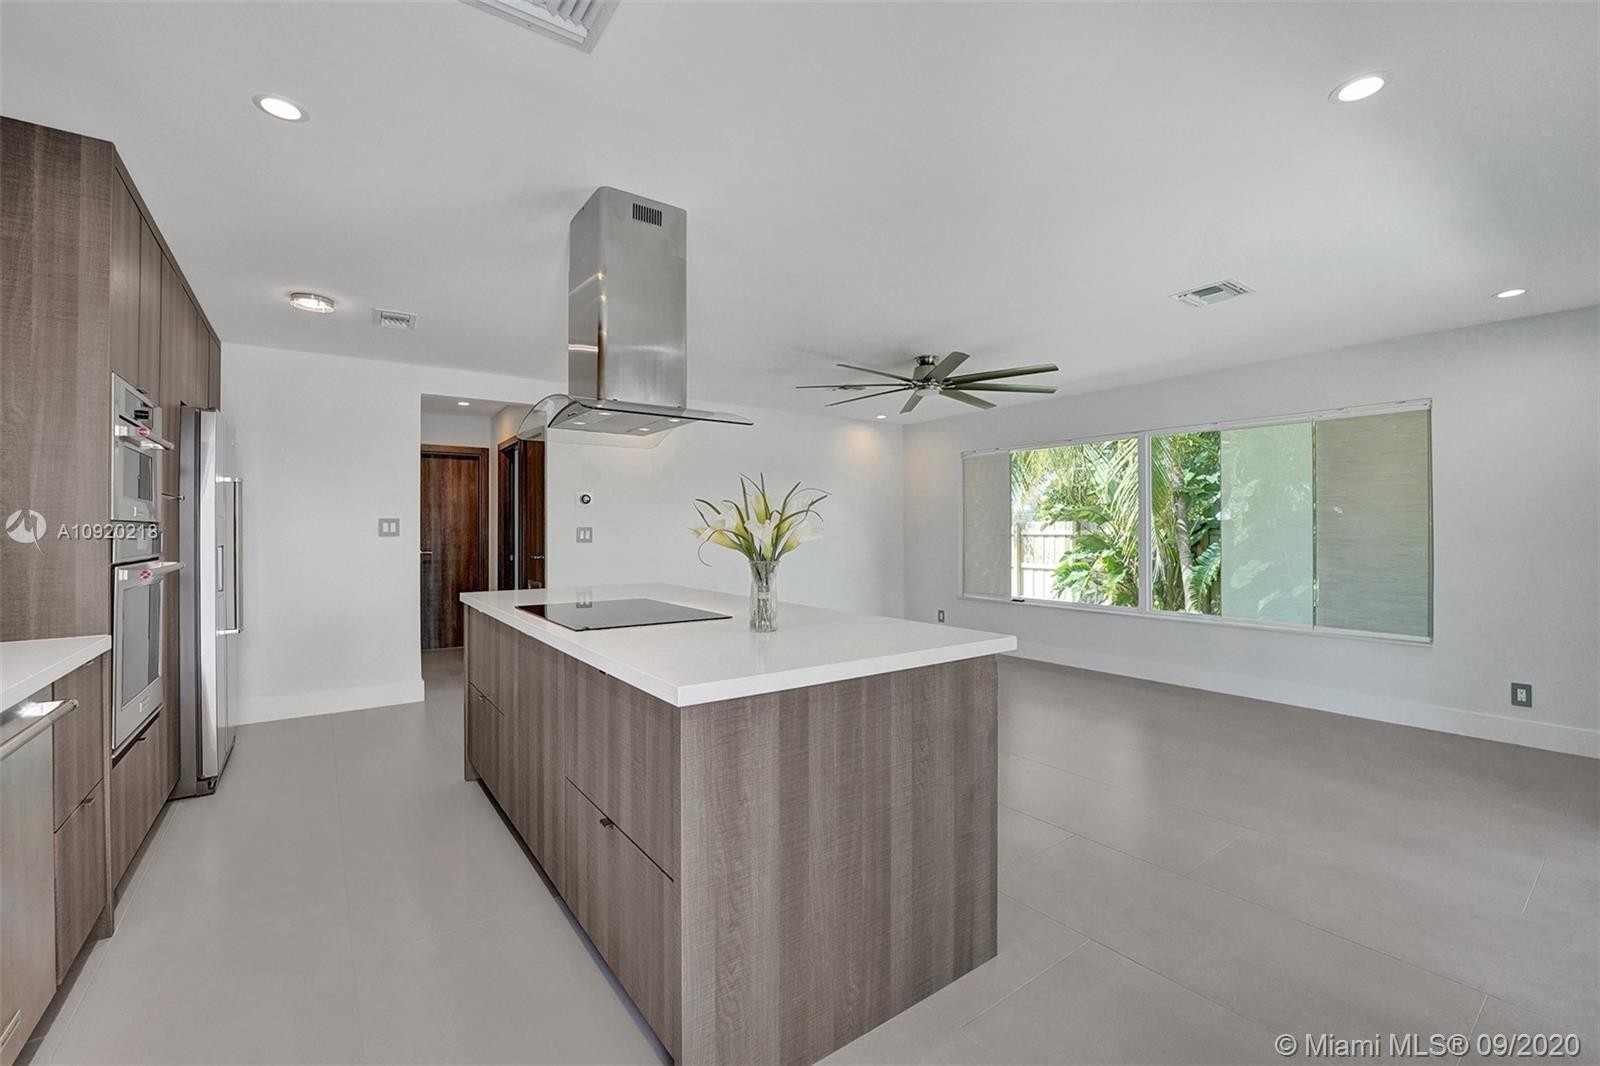 17. Rentals at 2706 NE 32nd Ave, 1 Fort Lauderdale